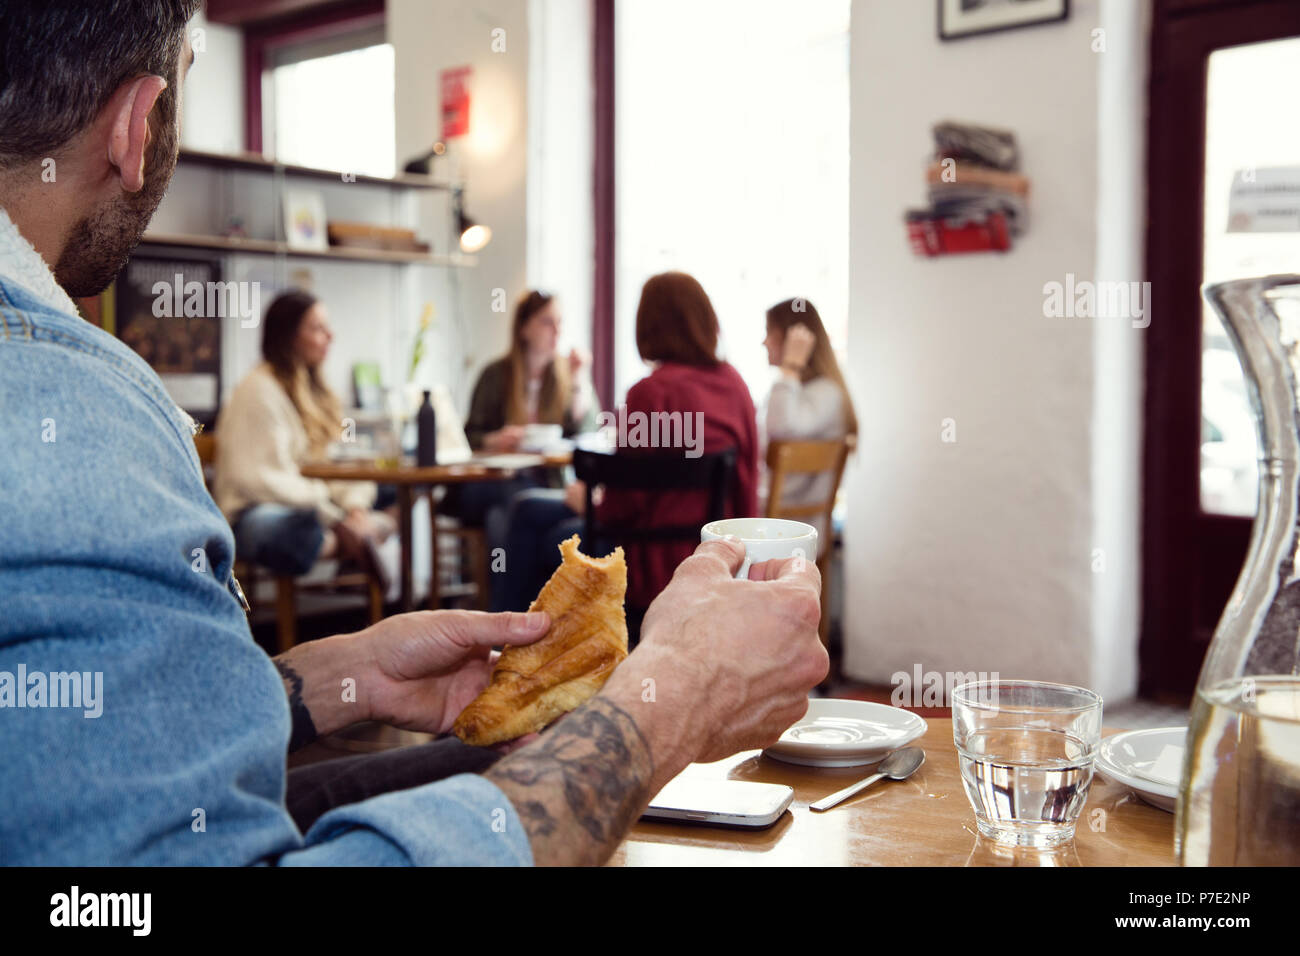 Man having breakfast, distracted by women on next table Stock Photo